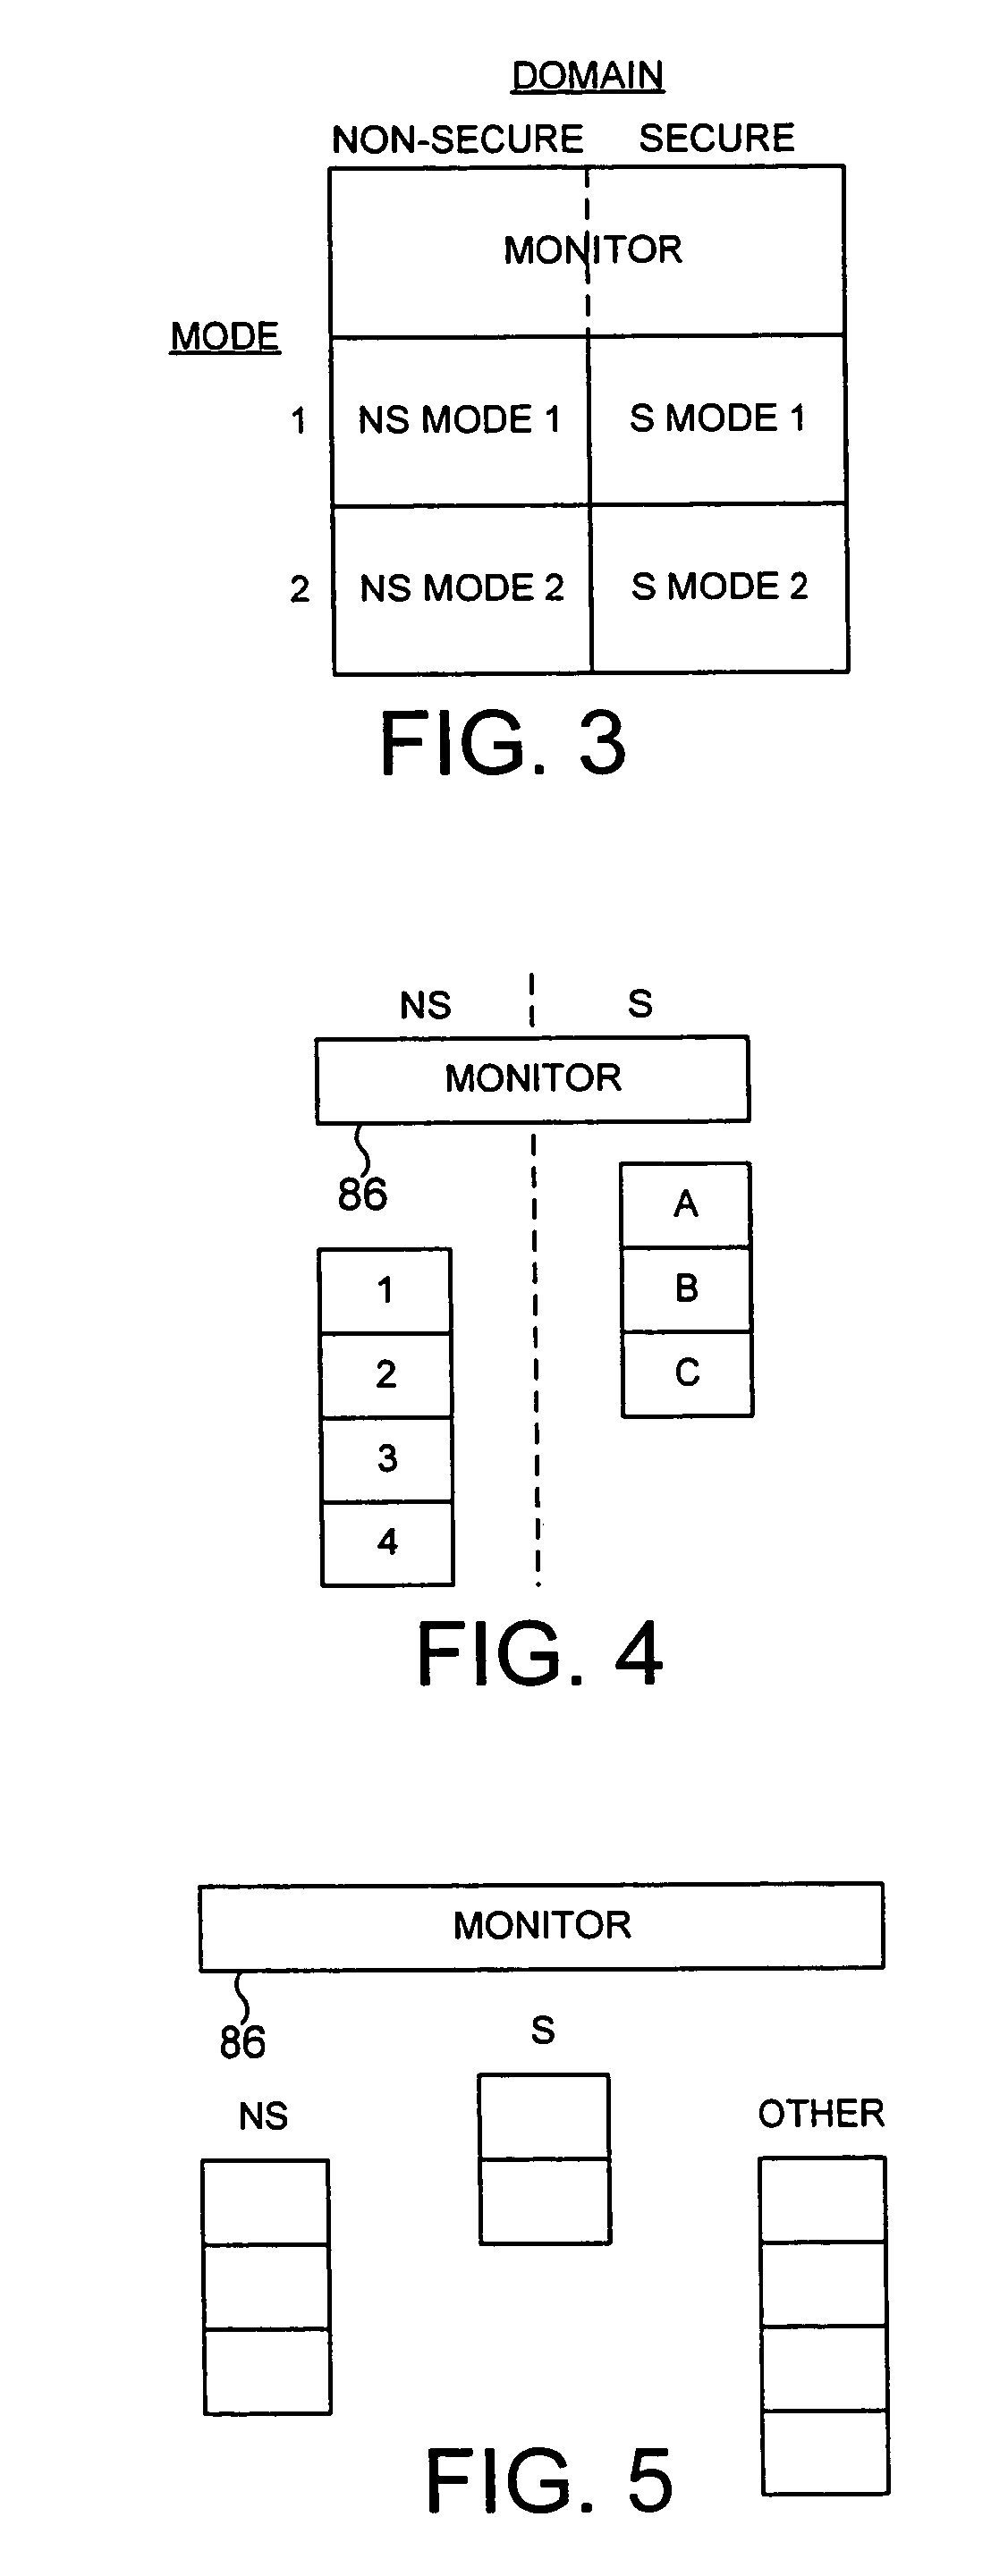 Virtual to physical memory address mapping within a system having a secure domain and a non-secure domain